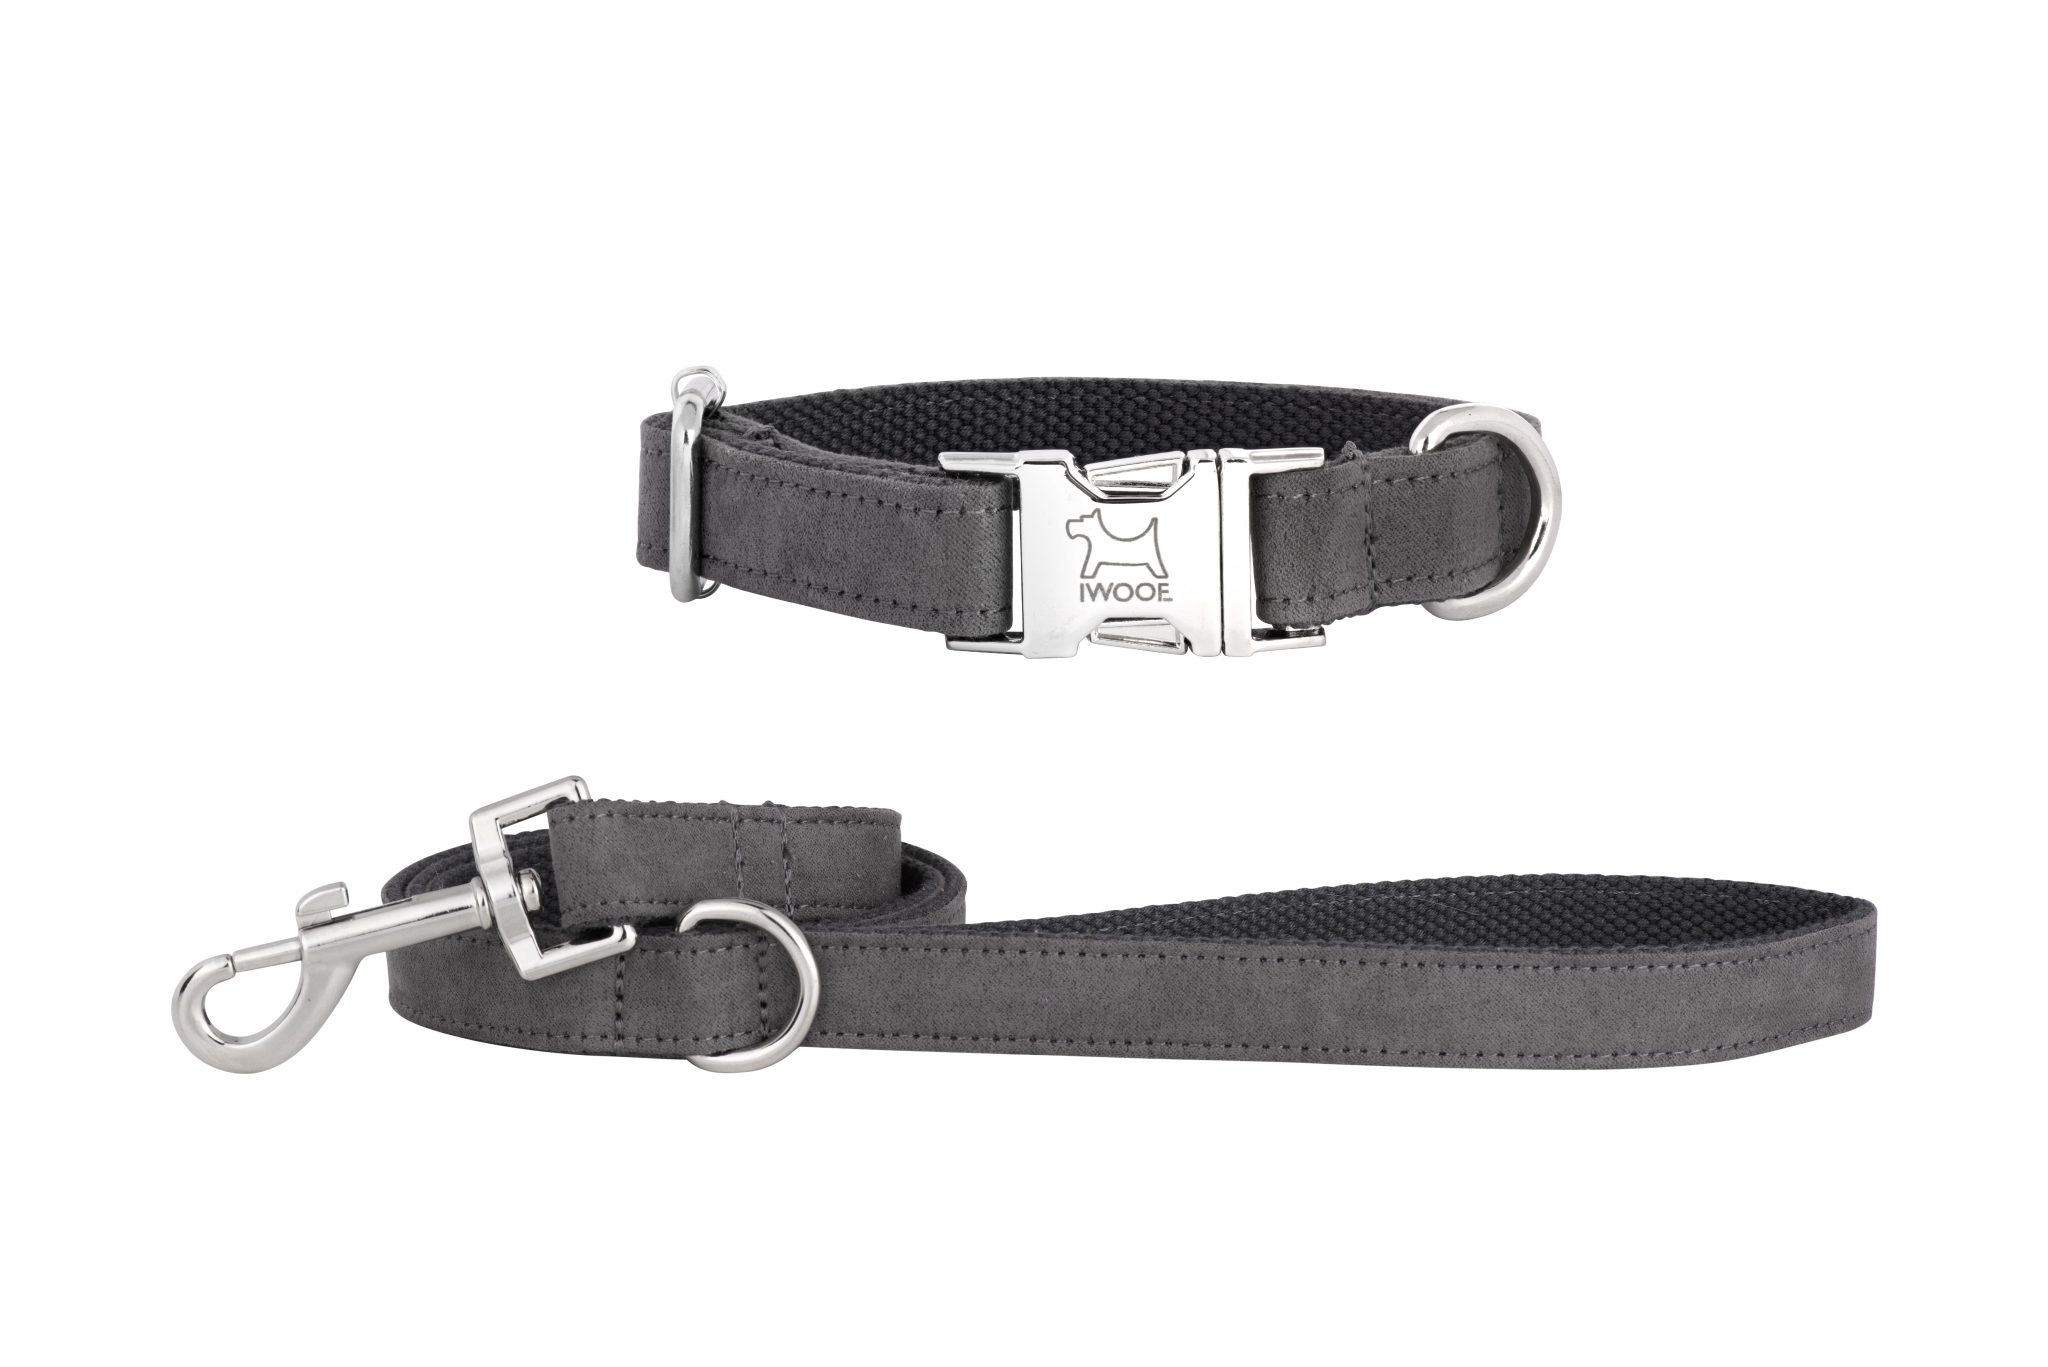 Dolphin designer dog collar and matching dog lead by IWOOF